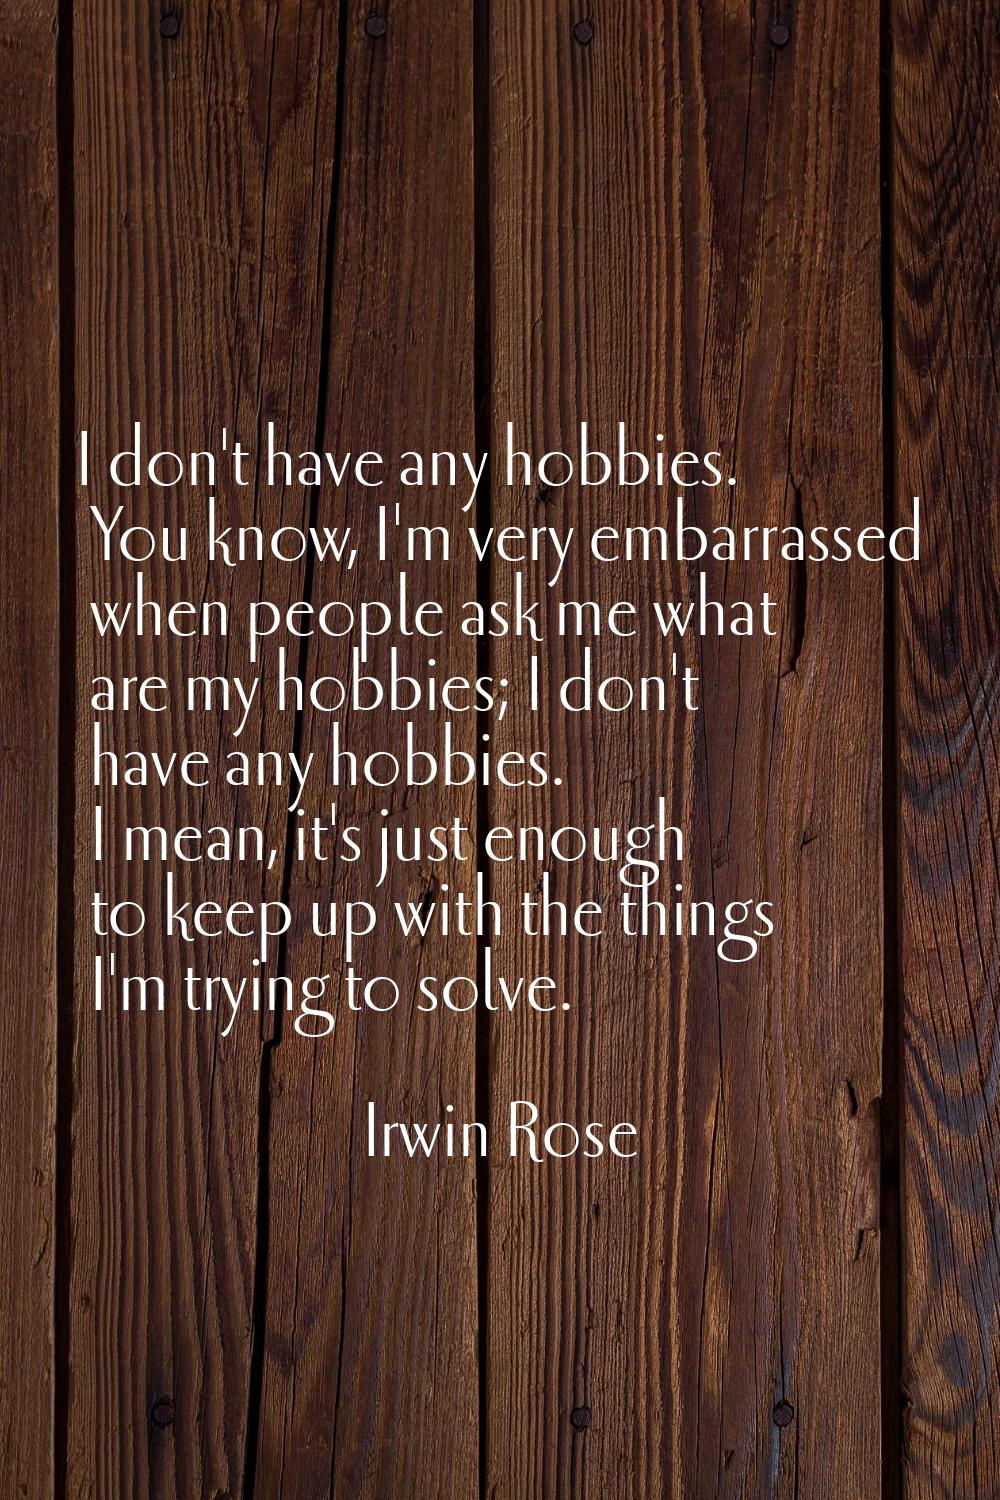 I don't have any hobbies. You know, I'm very embarrassed when people ask me what are my hobbies; I 